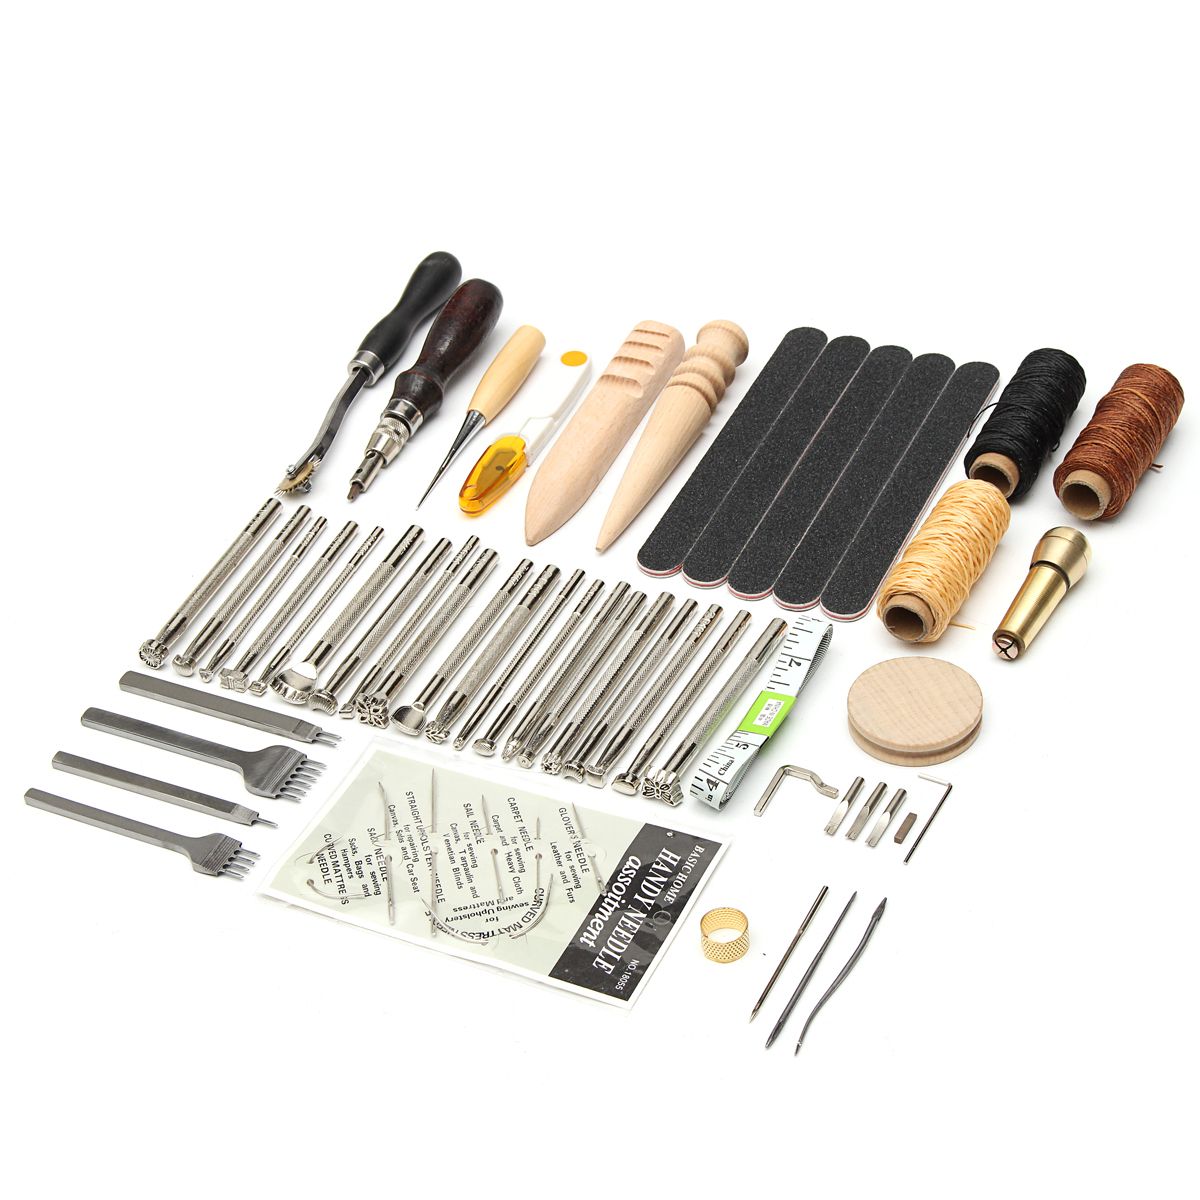 59Pcs-Leather-Craft-Hand-Tools-Kit-For-Hand-StitchingSewing-Stamping-Set-1164656